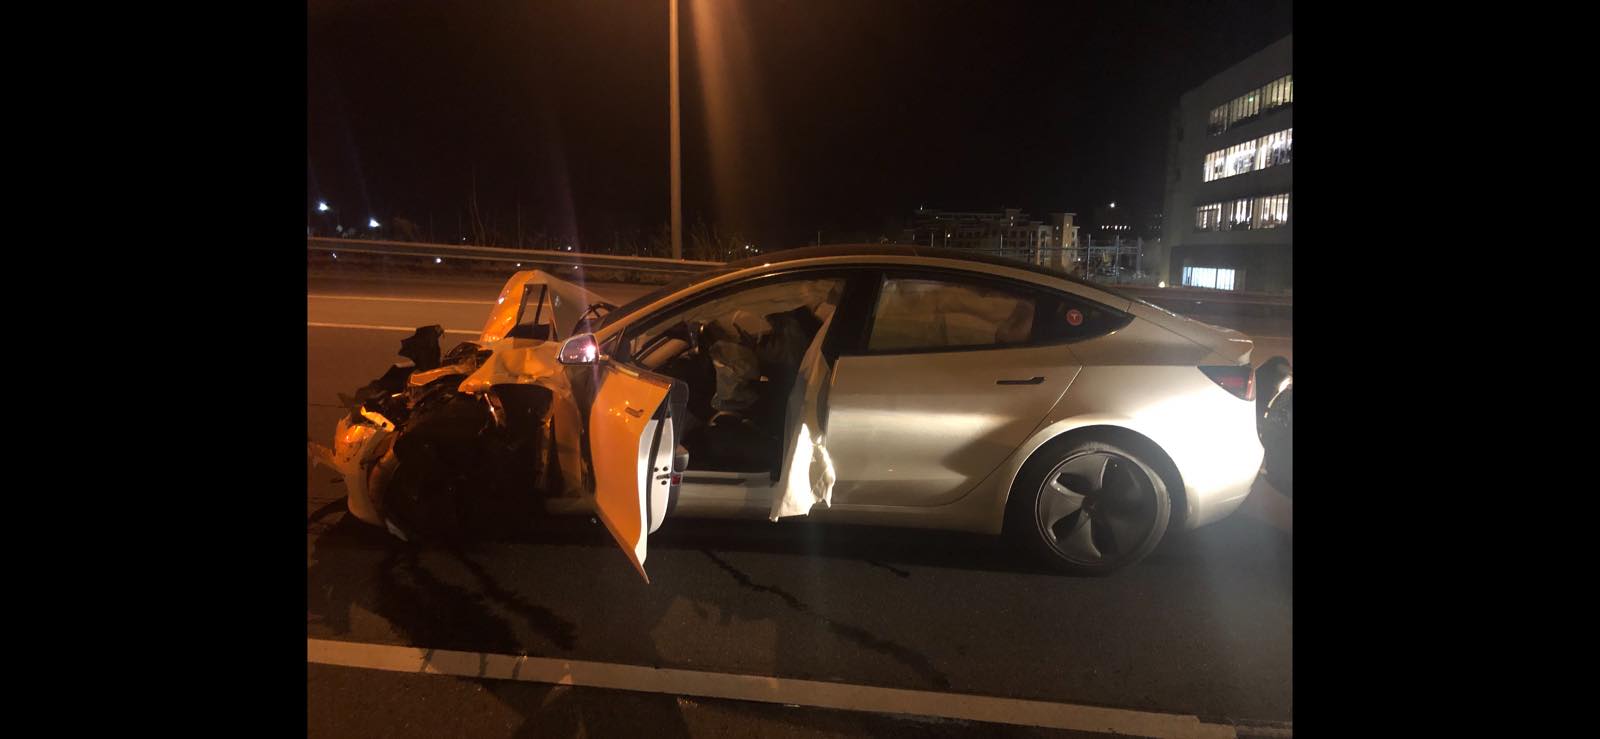 PHOTO: Connecticut State Police reported a Tesla crashed into a disabled vehicle on the side of the road while on "auto-pilot." 